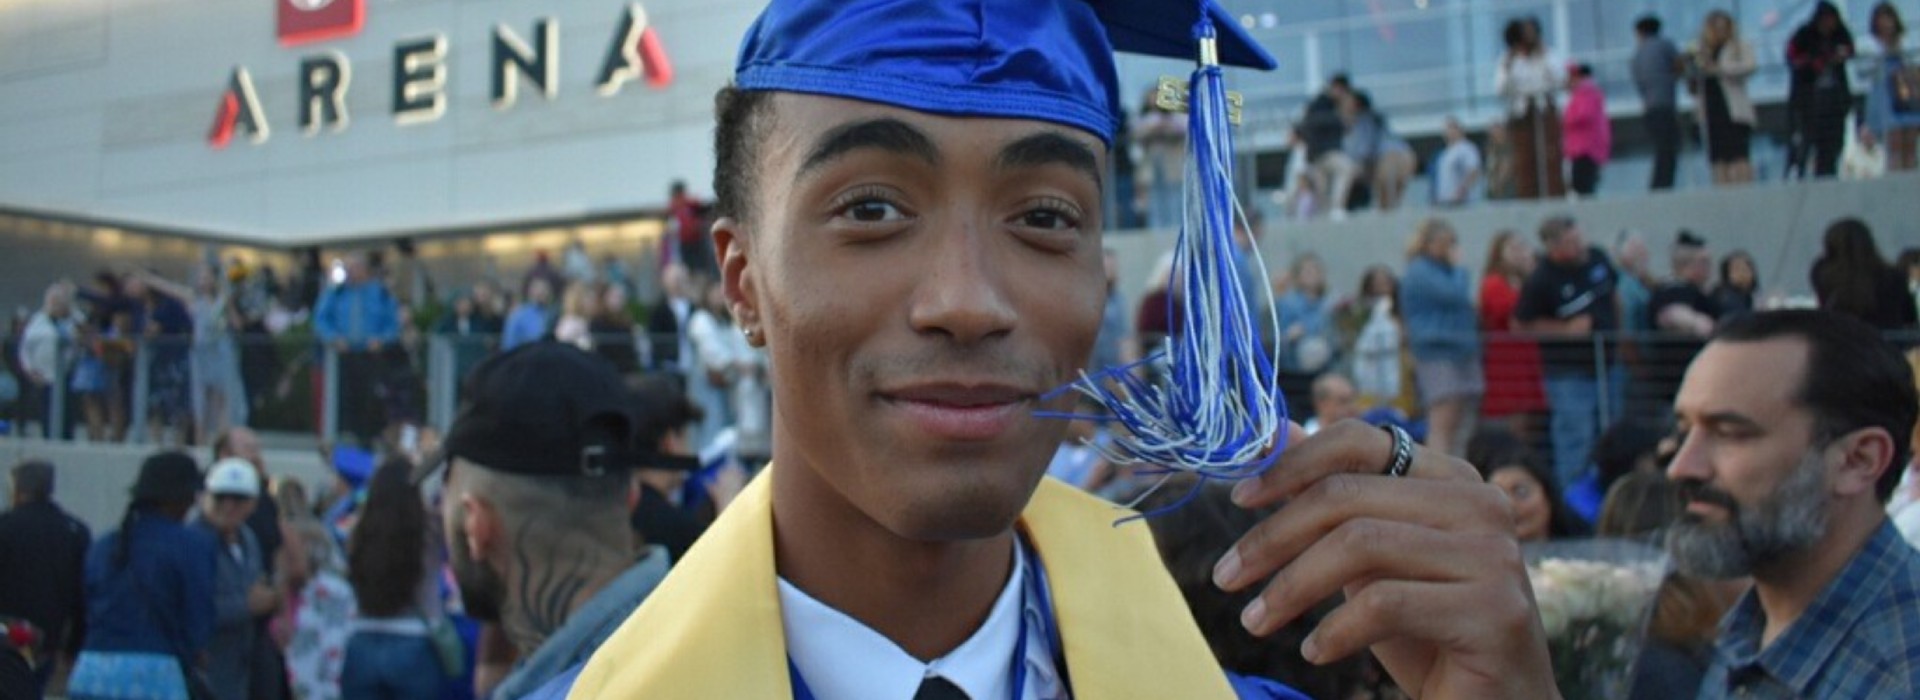 A young man in a graduation cap and gown.